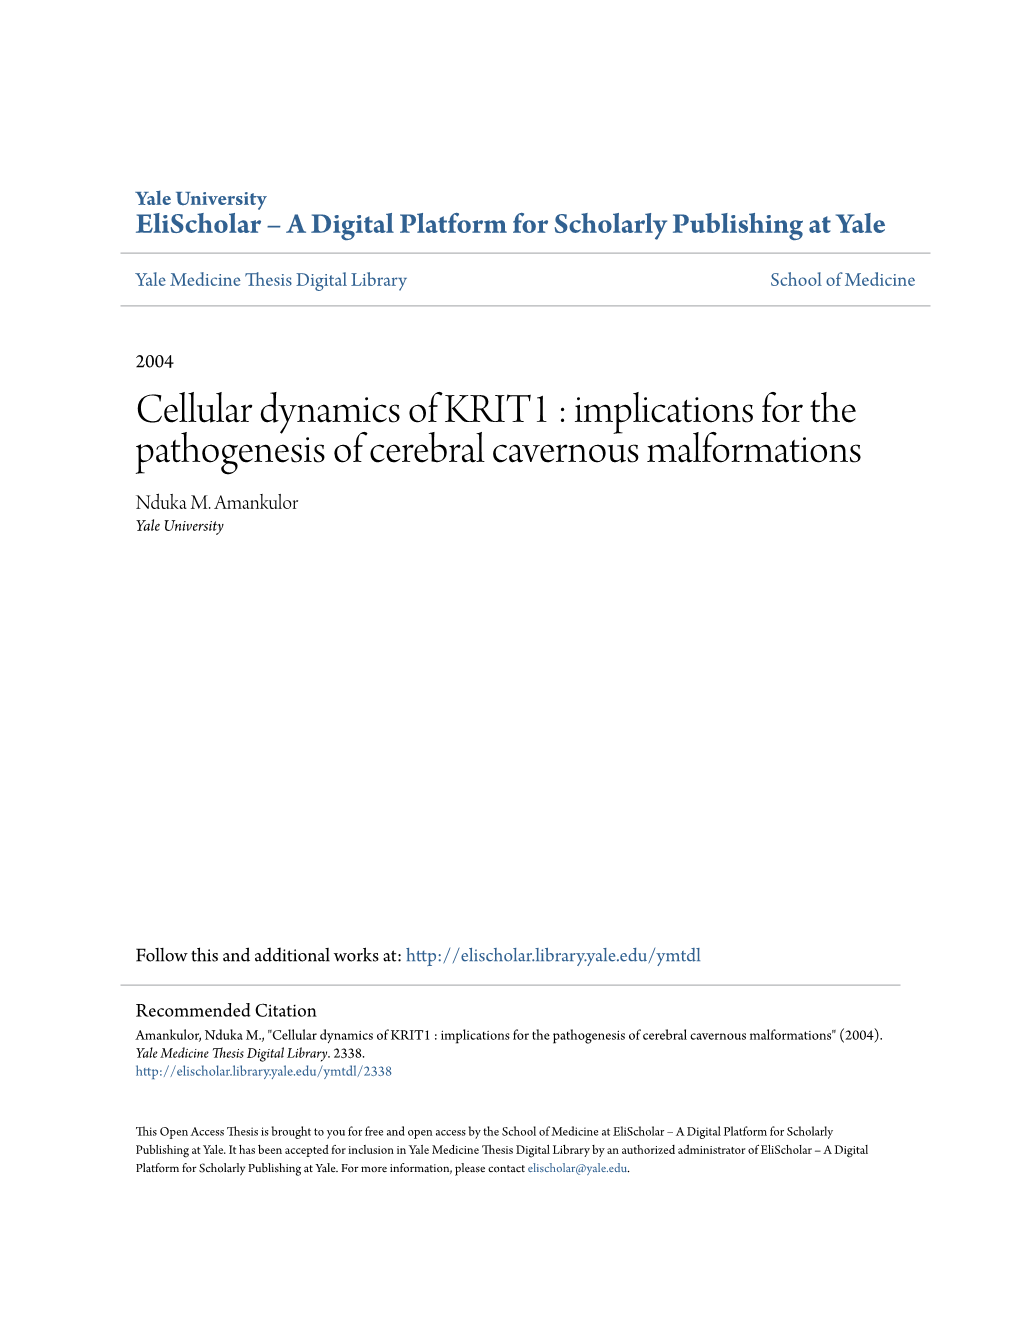 Cellular Dynamics of KRIT1 : Implications for the Pathogenesis of Cerebral Cavernous Malformations Nduka M